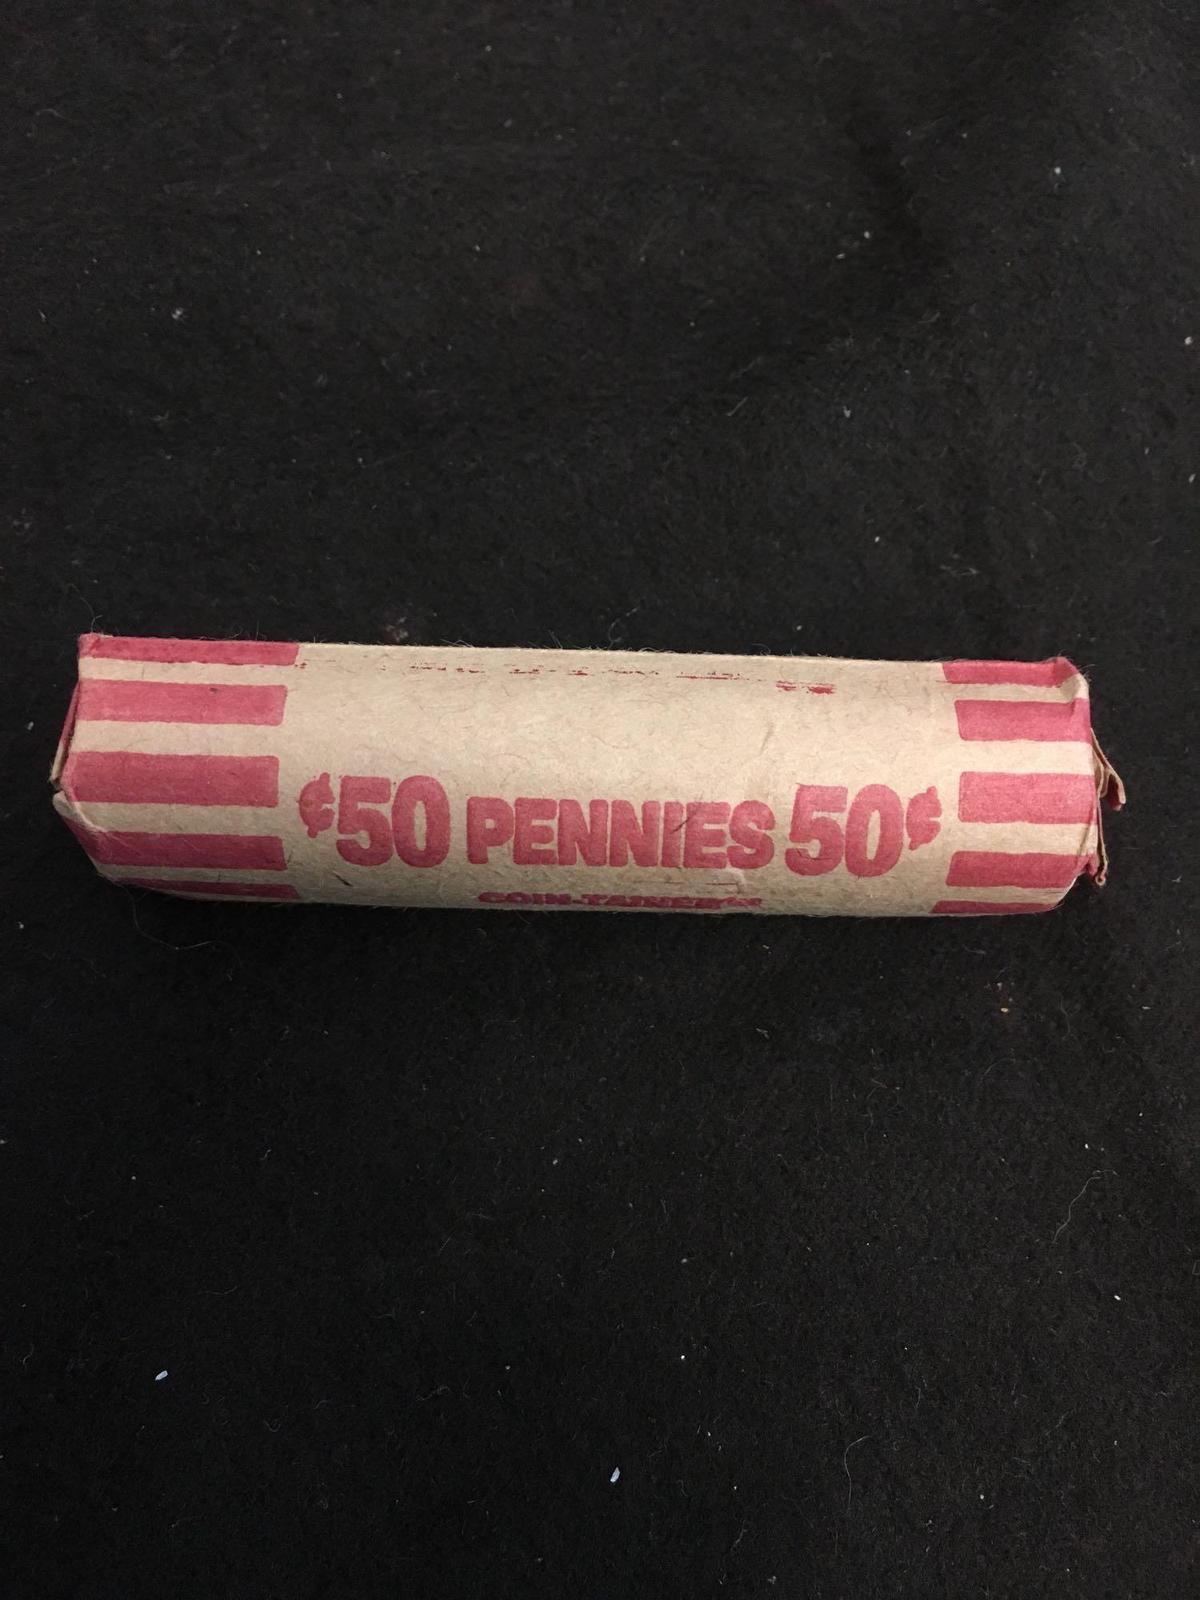 50 Count Roll of United States Wheat Pennies Coins - Unsearched